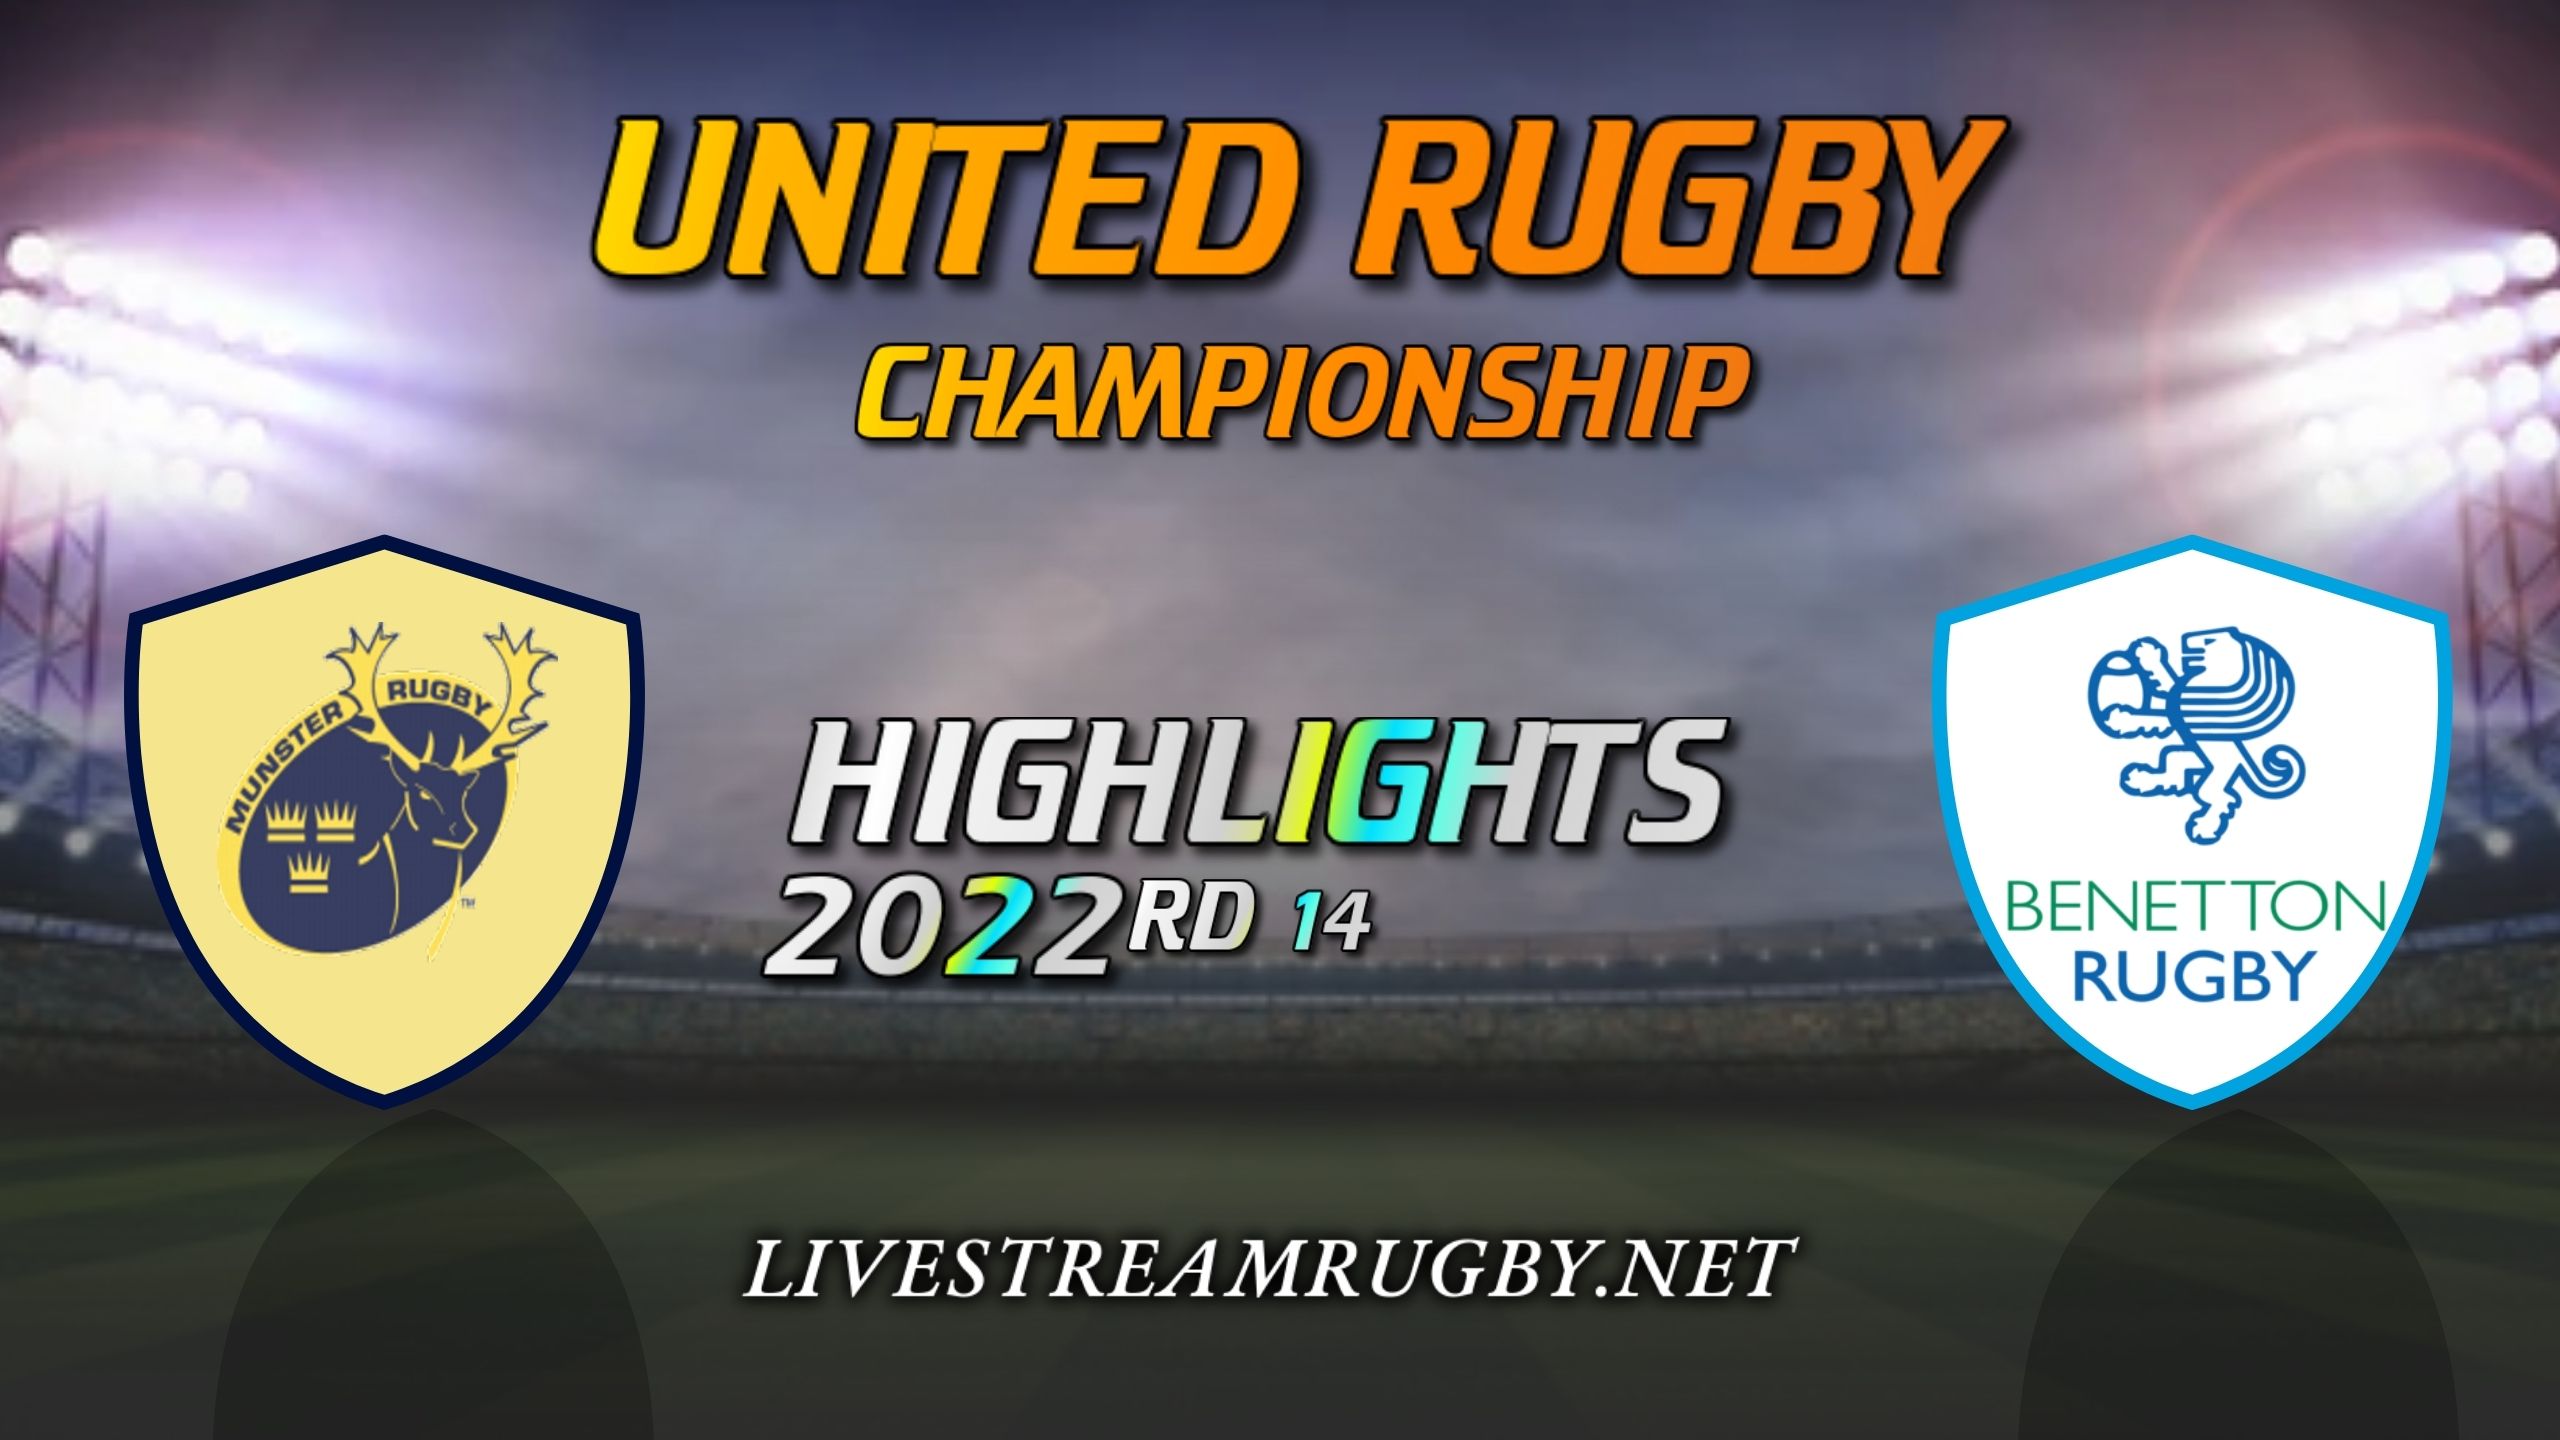 Munster Vs Benetton Highlights 2022 Rd 14 United Rugby